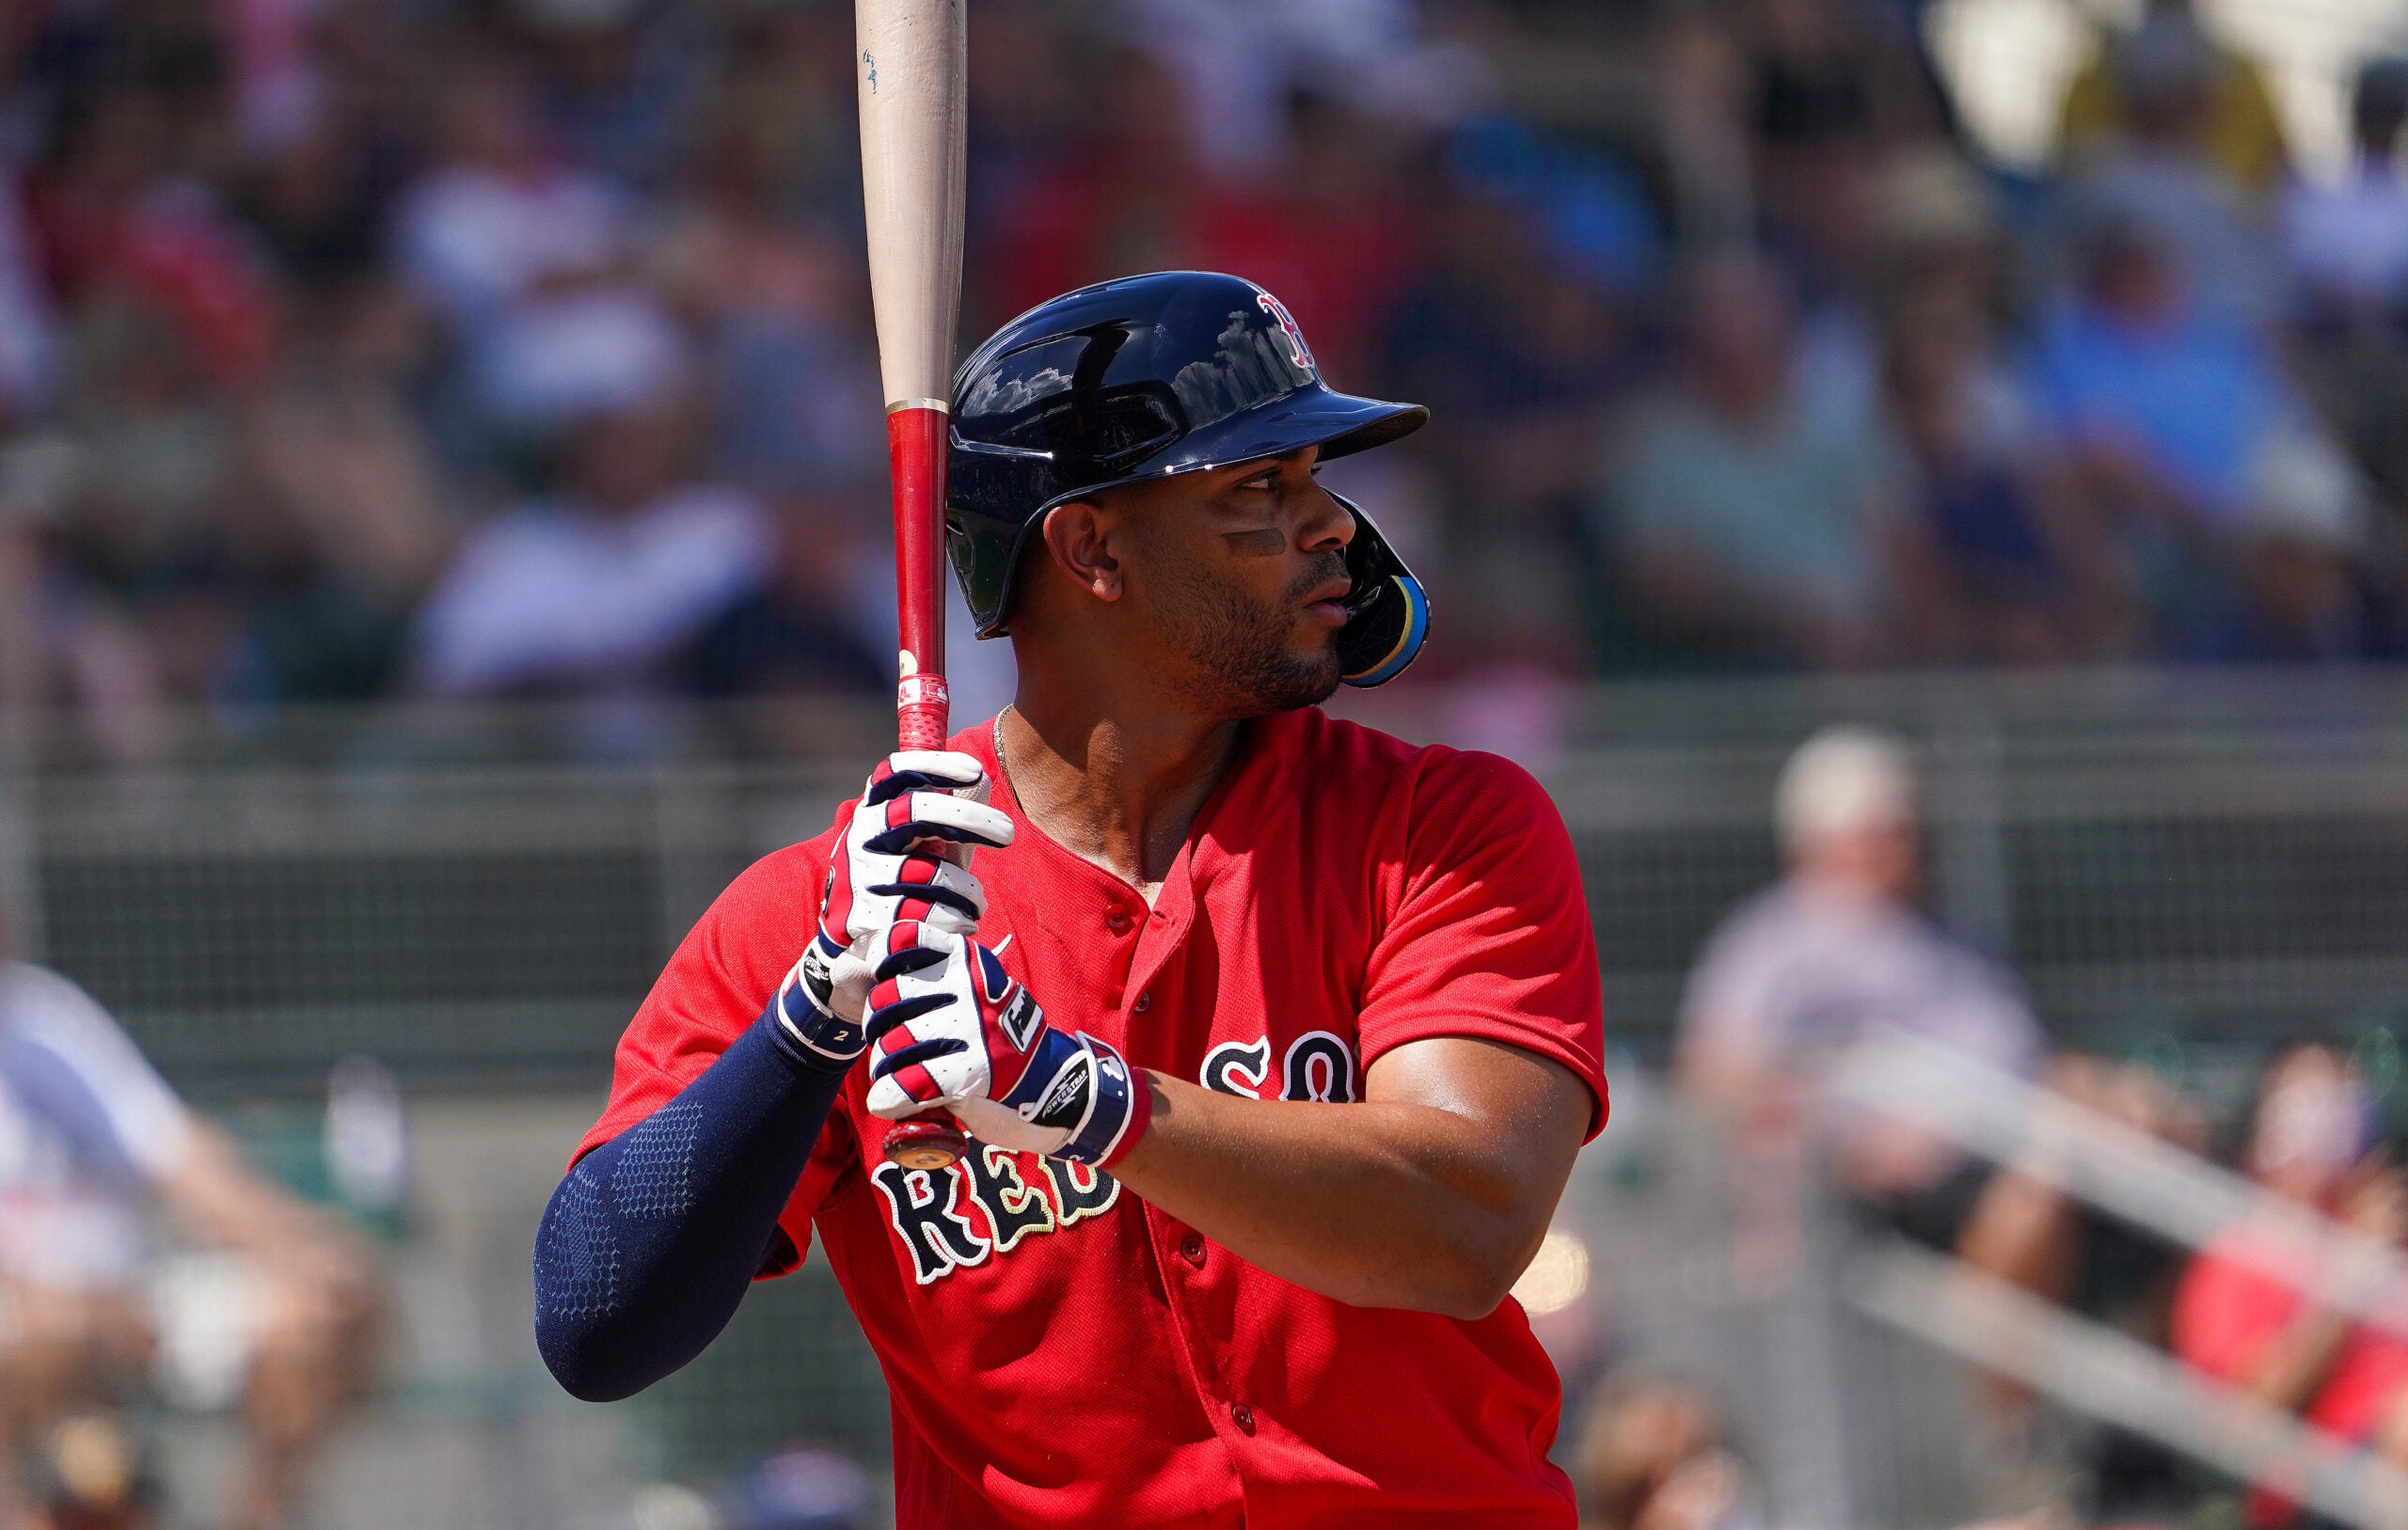 Kennedy says Red Sox haven't discussed Xander Bogaerts trade